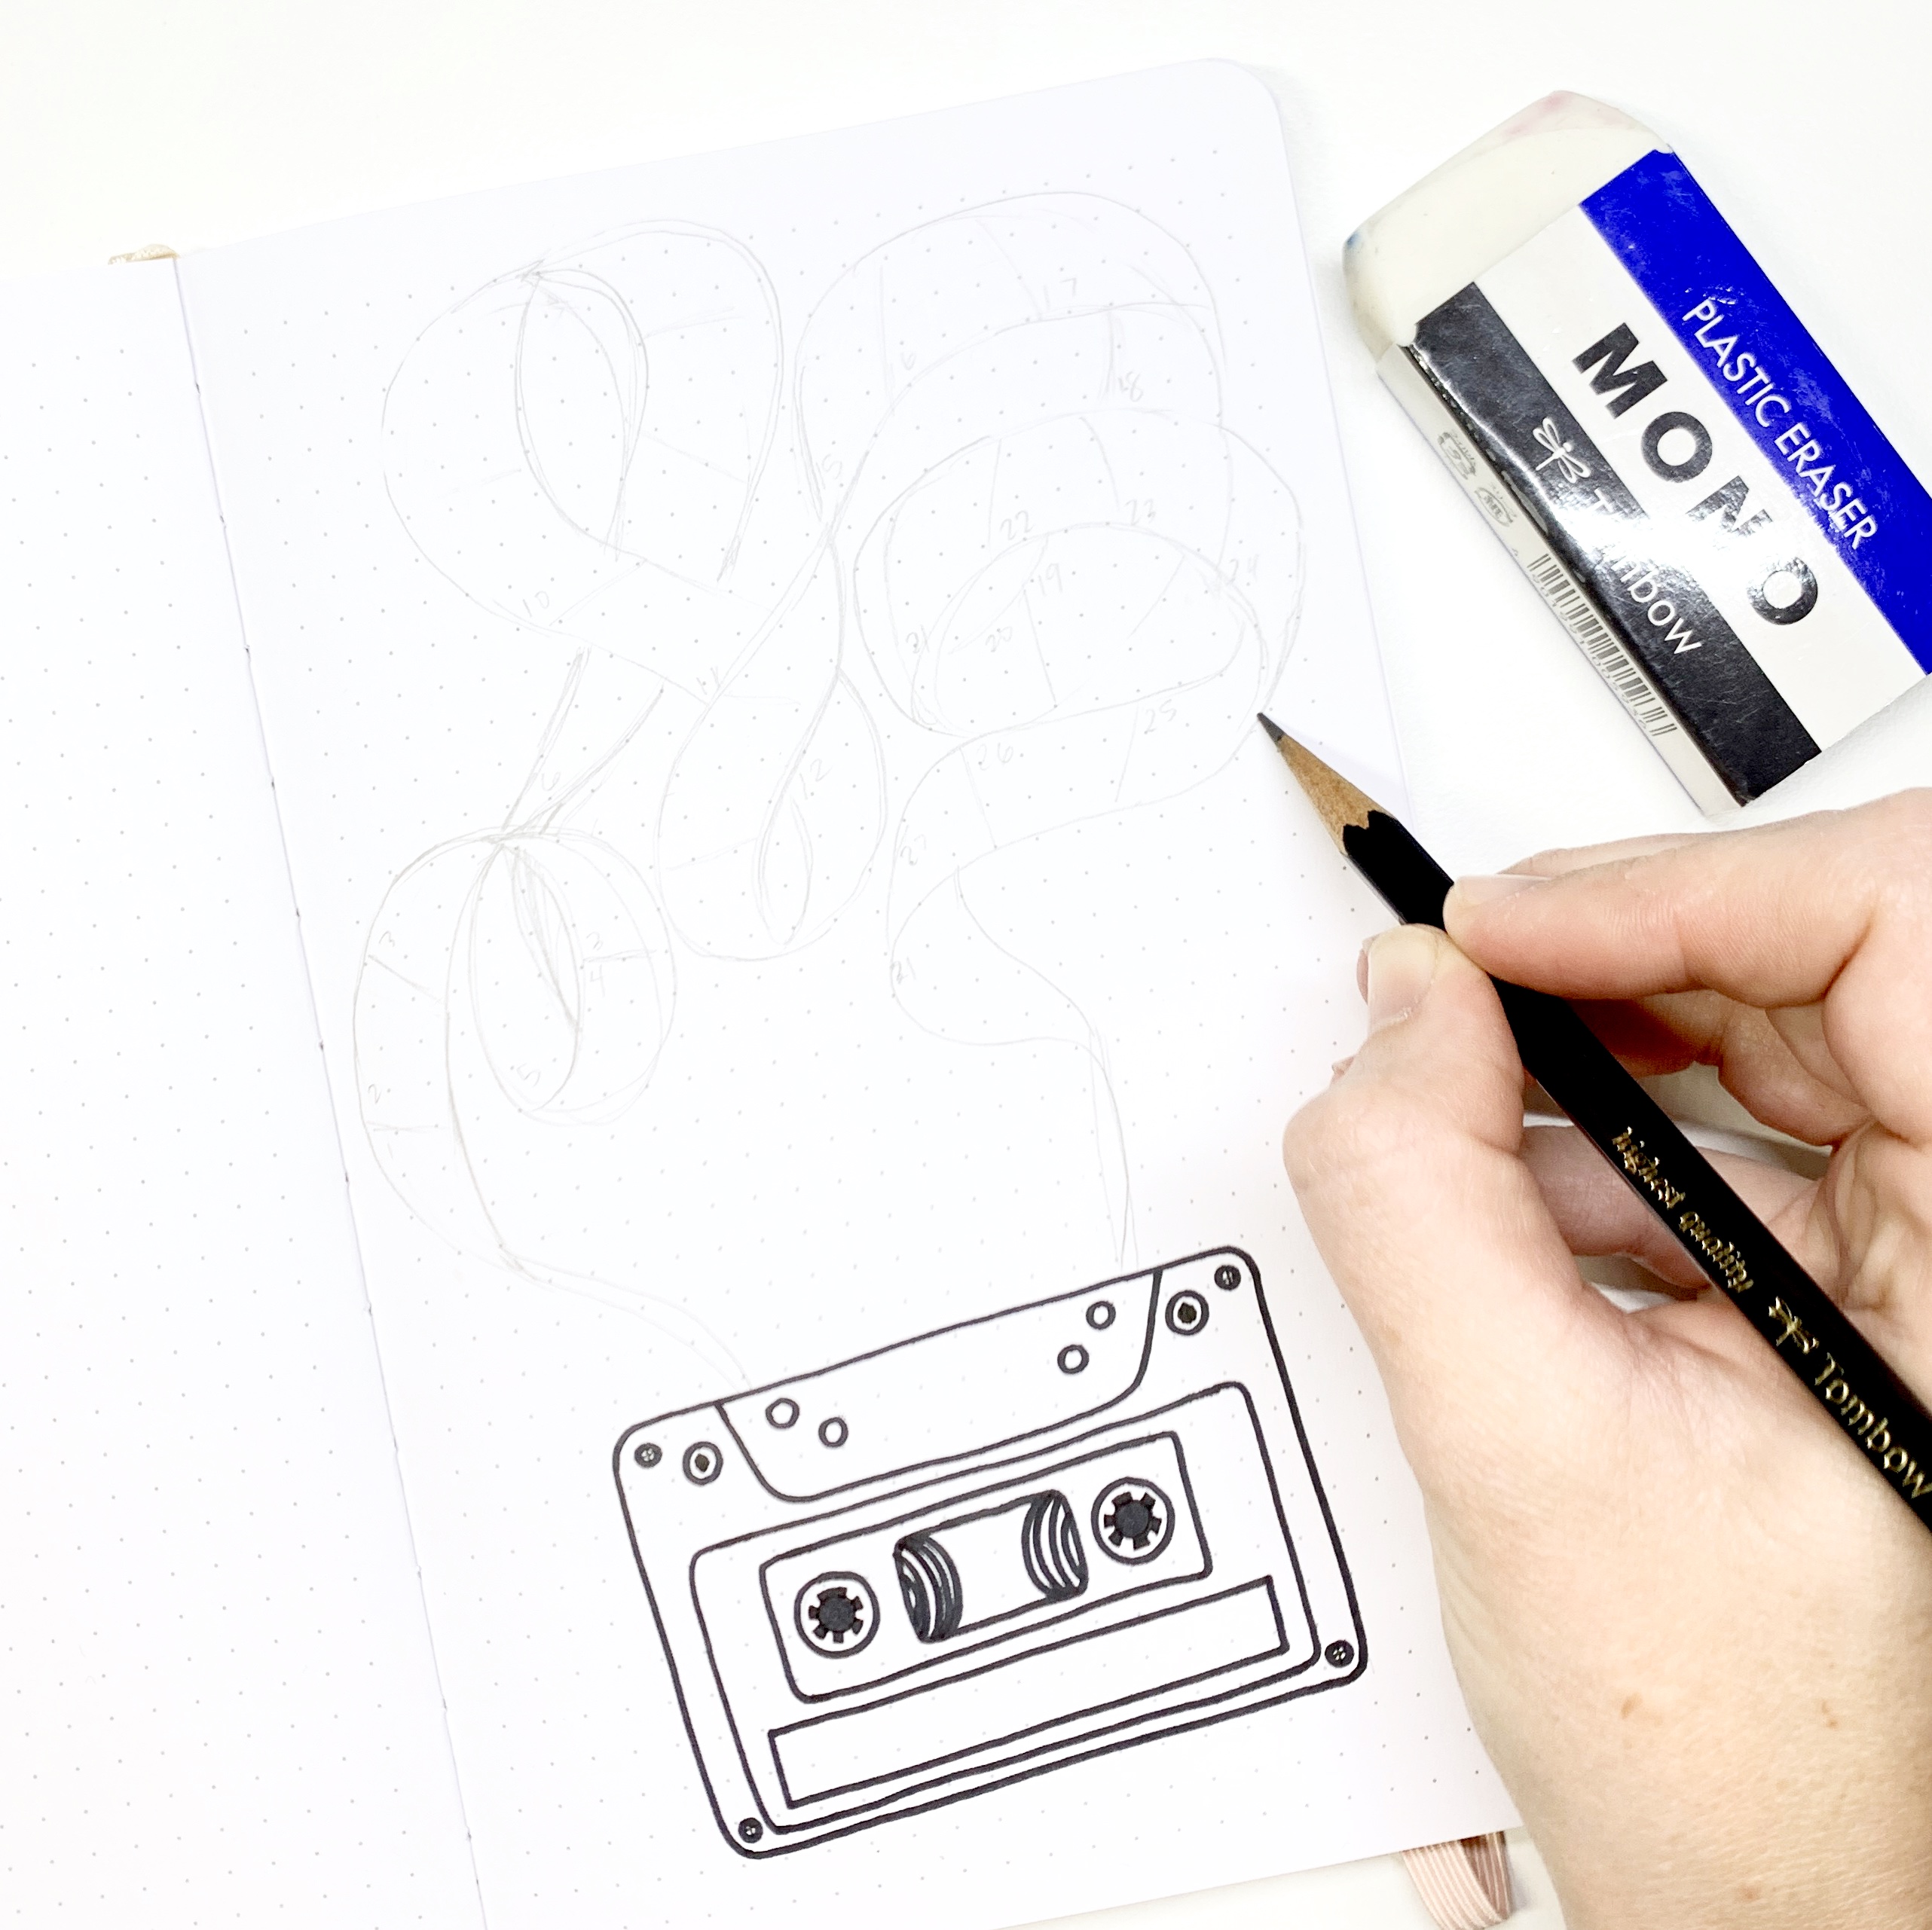 Learn how to create a cassette tape habit tracker in your dot grid notebook with Adrienne from @studio80design!